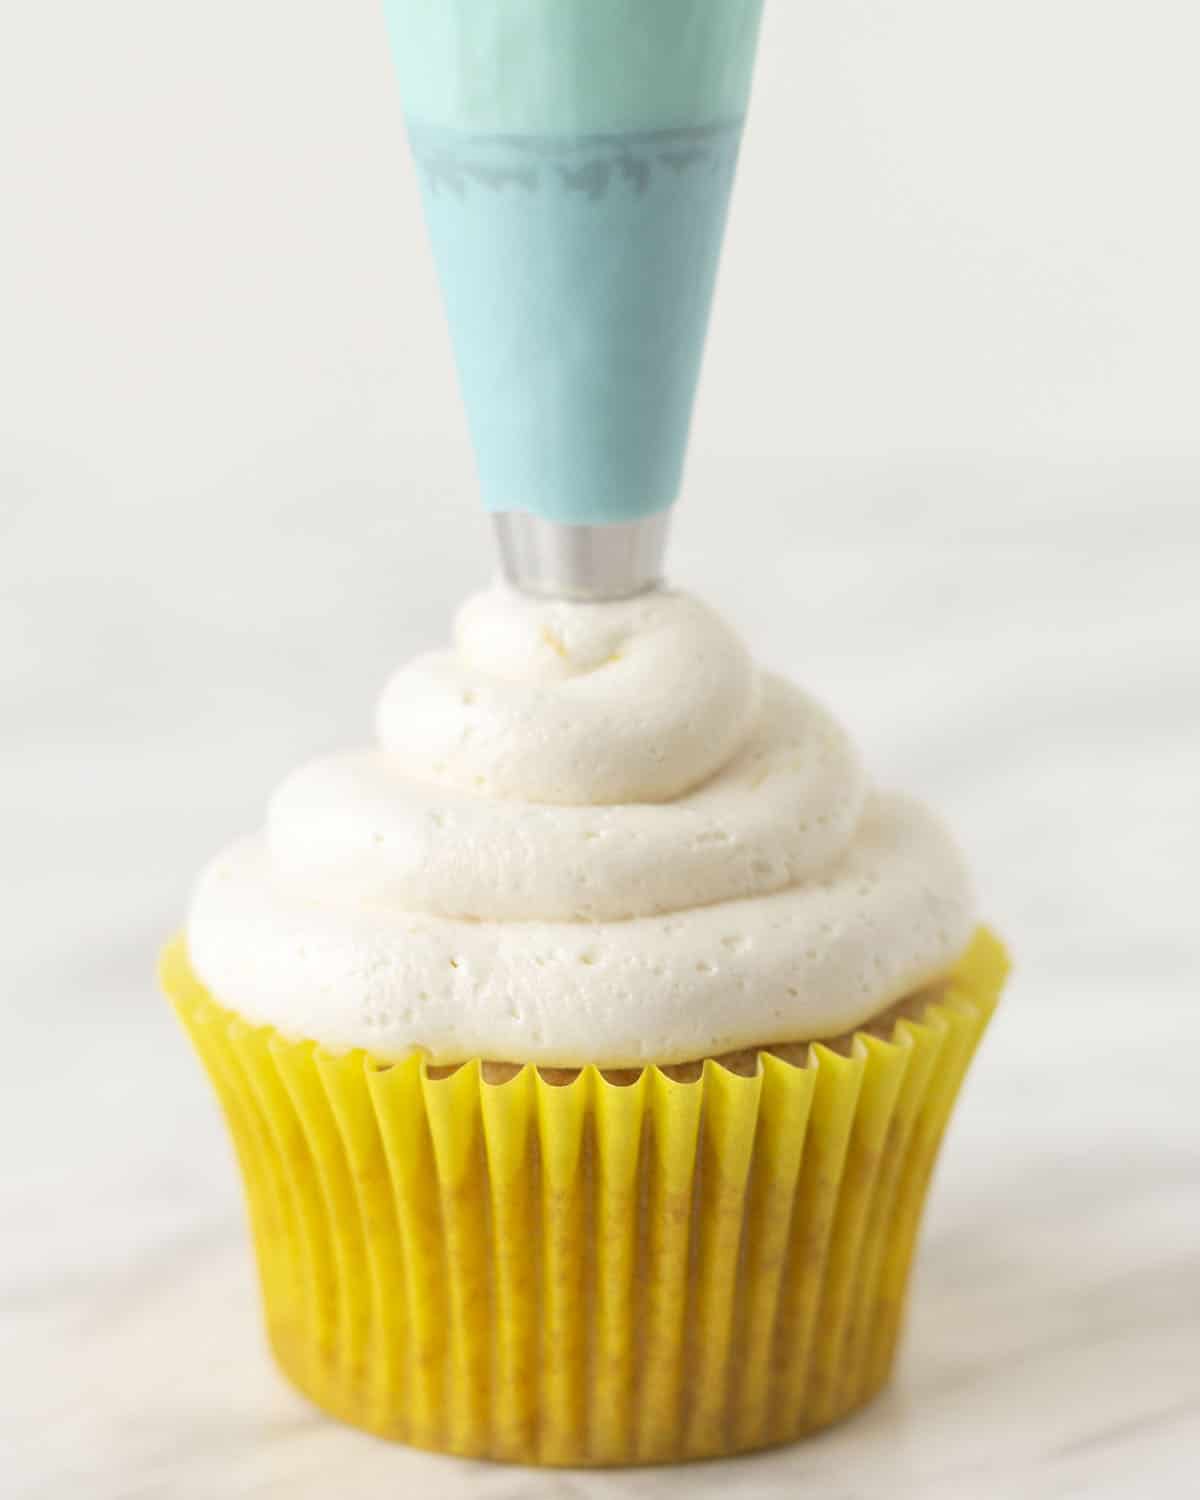 Vegan lemon buttercream frosting being piped onto a lemon cupcake with a blue piping bag.